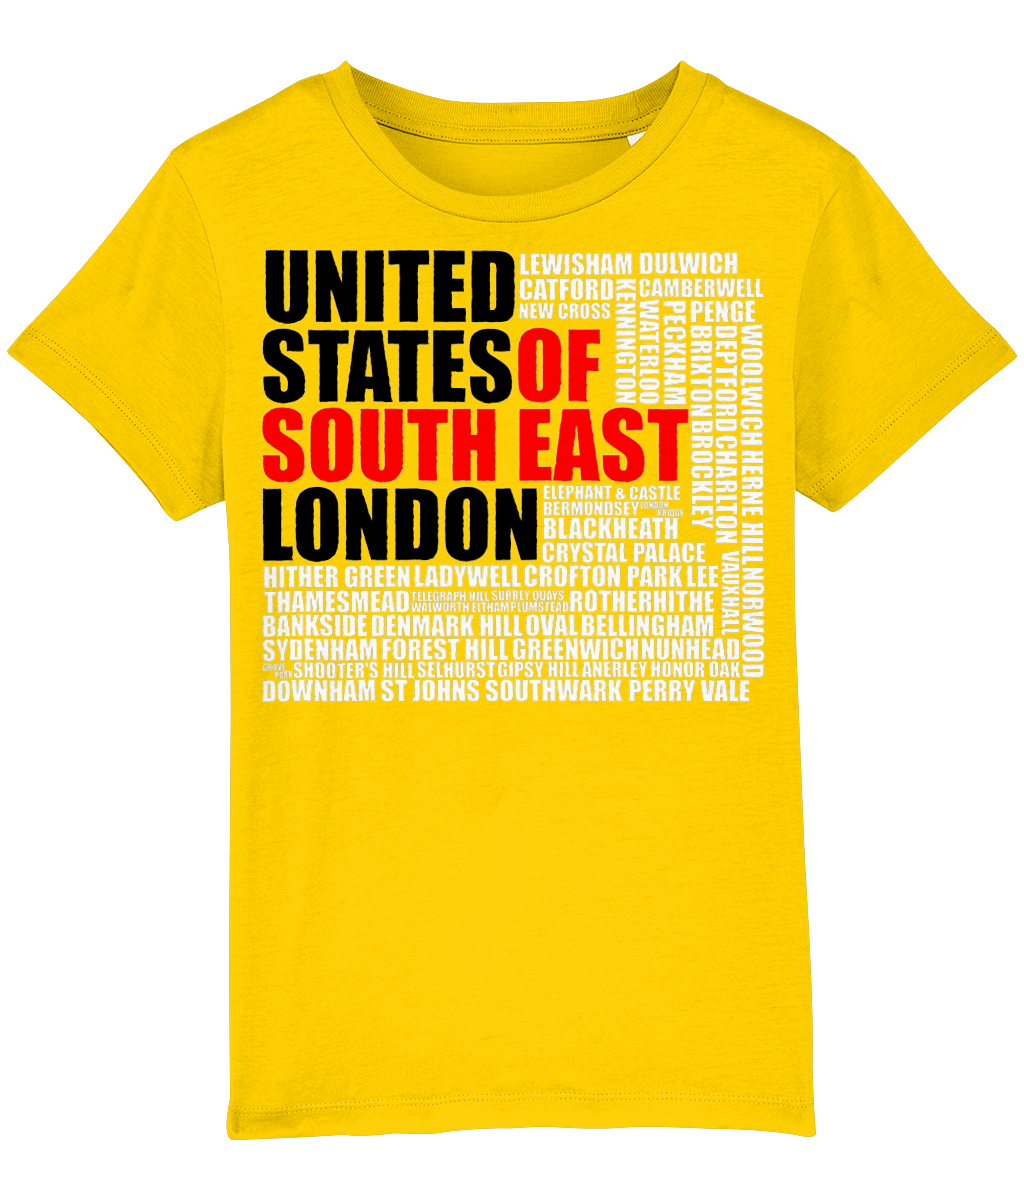 United States of South East London Kids T-Shirt